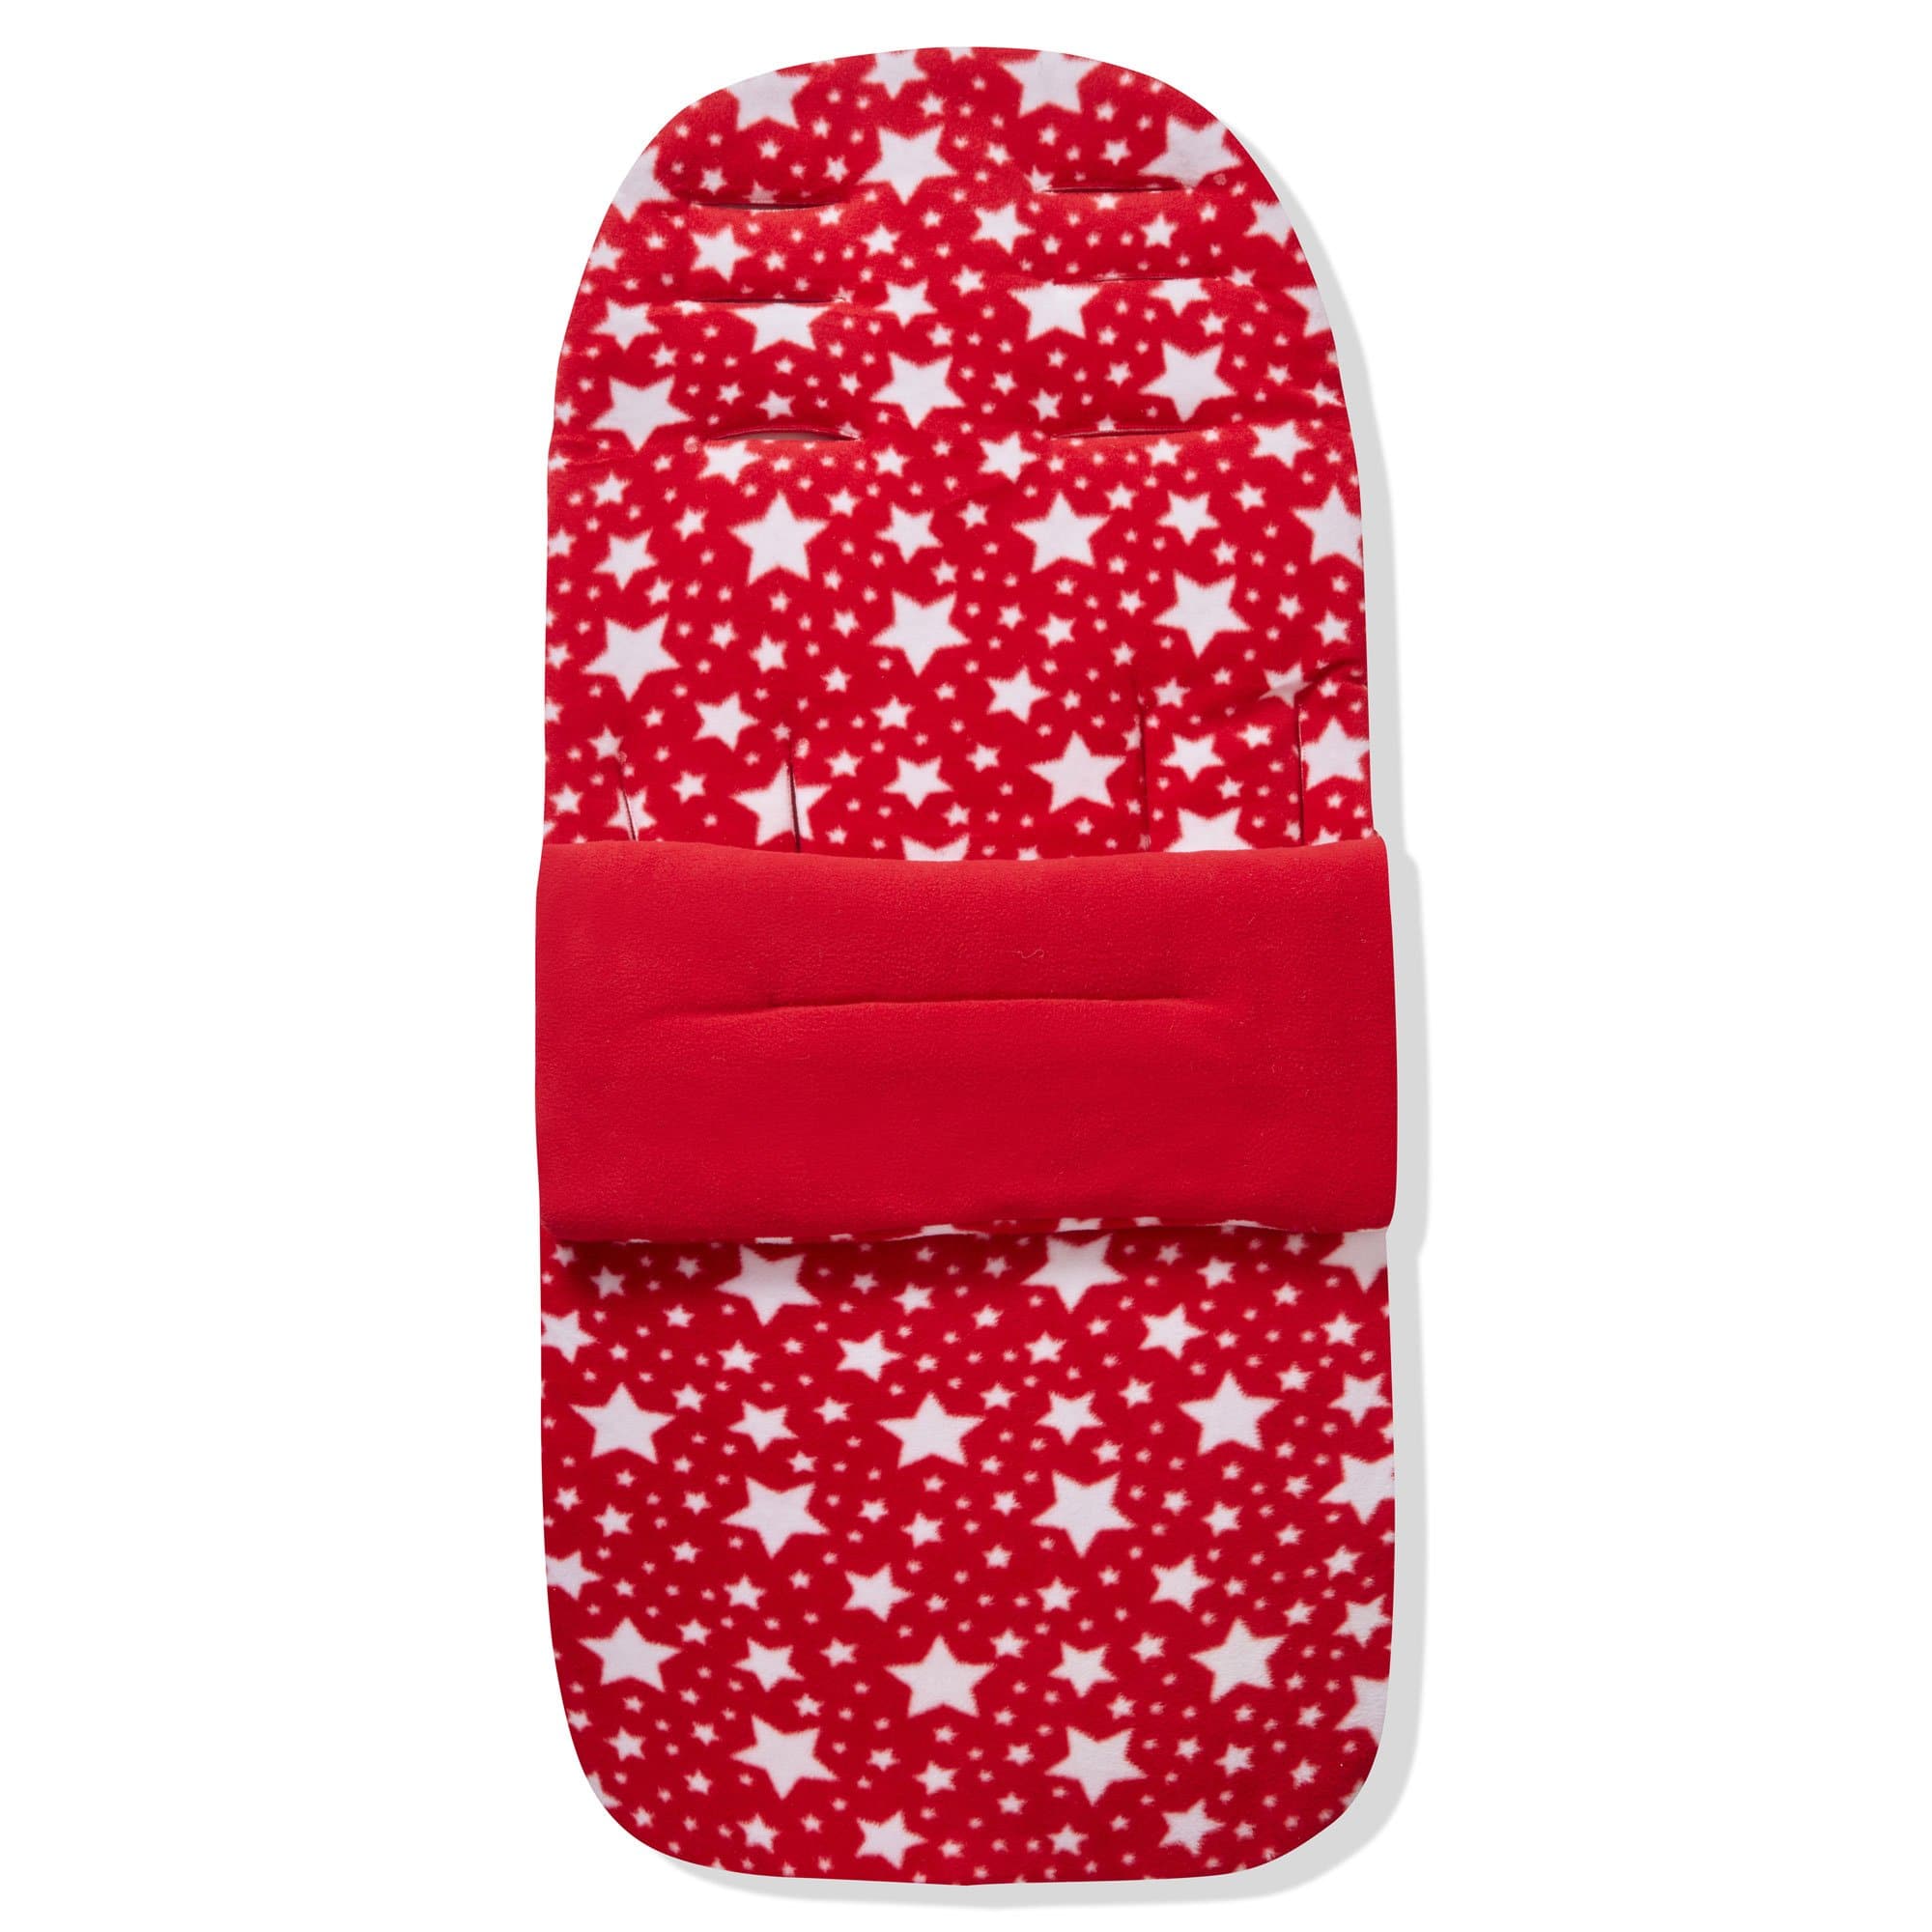 Fleece Footmuff / Cosy Toes Compatible with Koelstra - Red Star / Fits All Models | For Your Little One